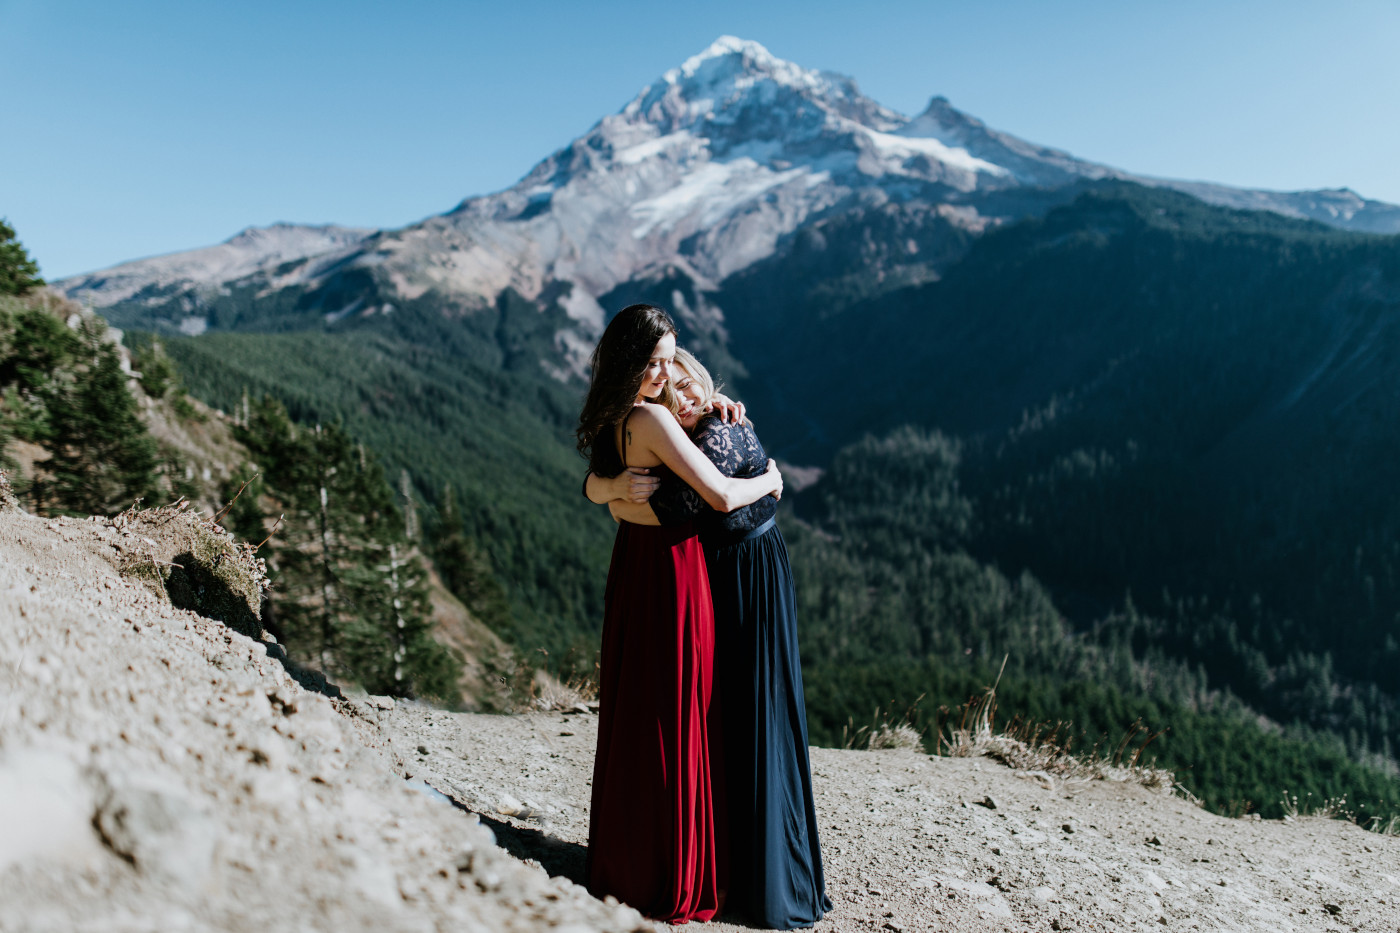 Tiffany and Hayley stand together with Mt Hood in the background. Elopement photography at the Columbia River Gorge by Sienna Plus Josh.